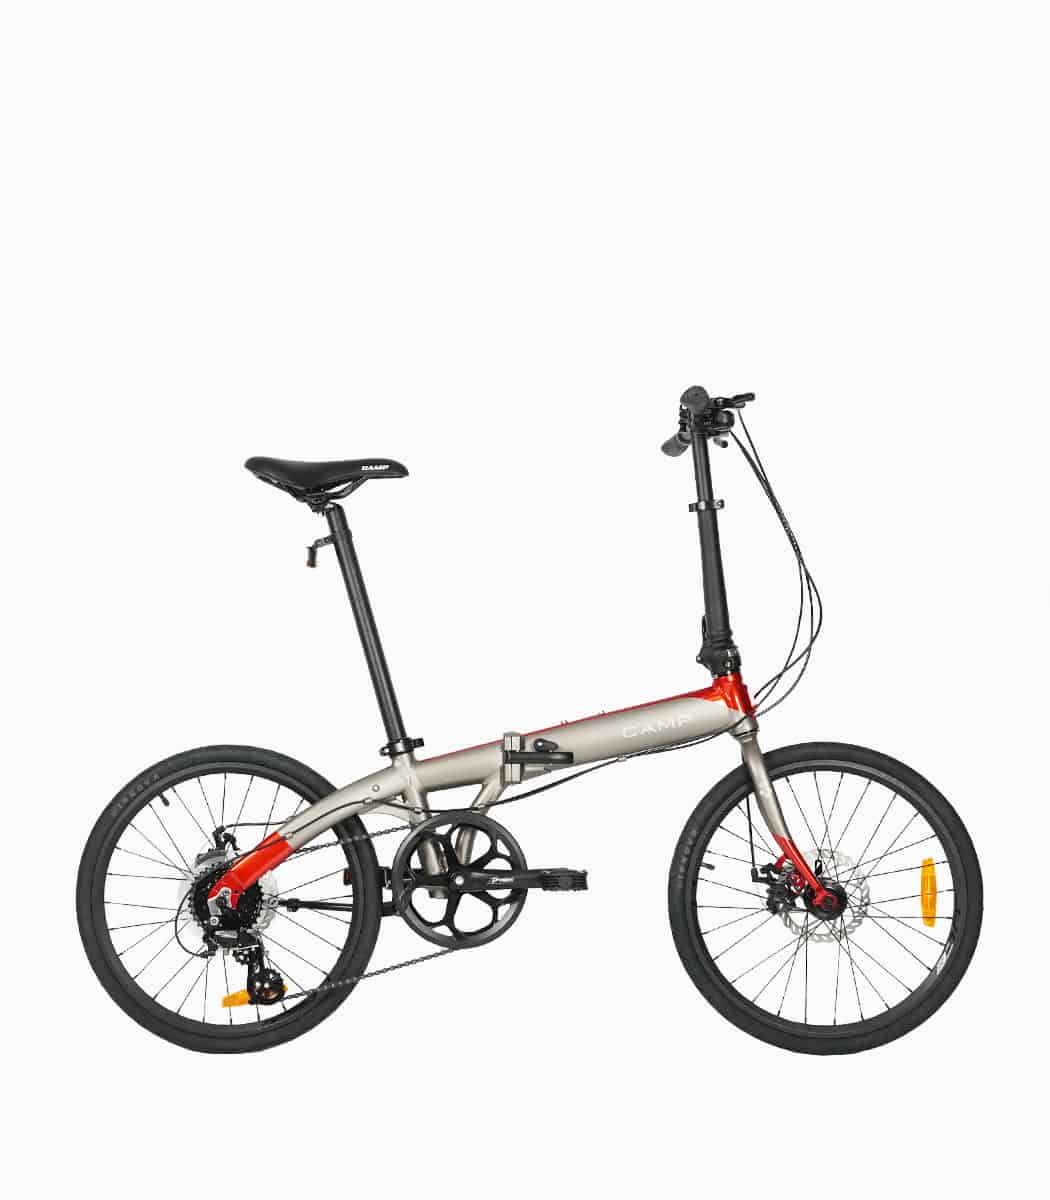 CAMP Polo 8 (SANDSTONE) foldable bicycle right